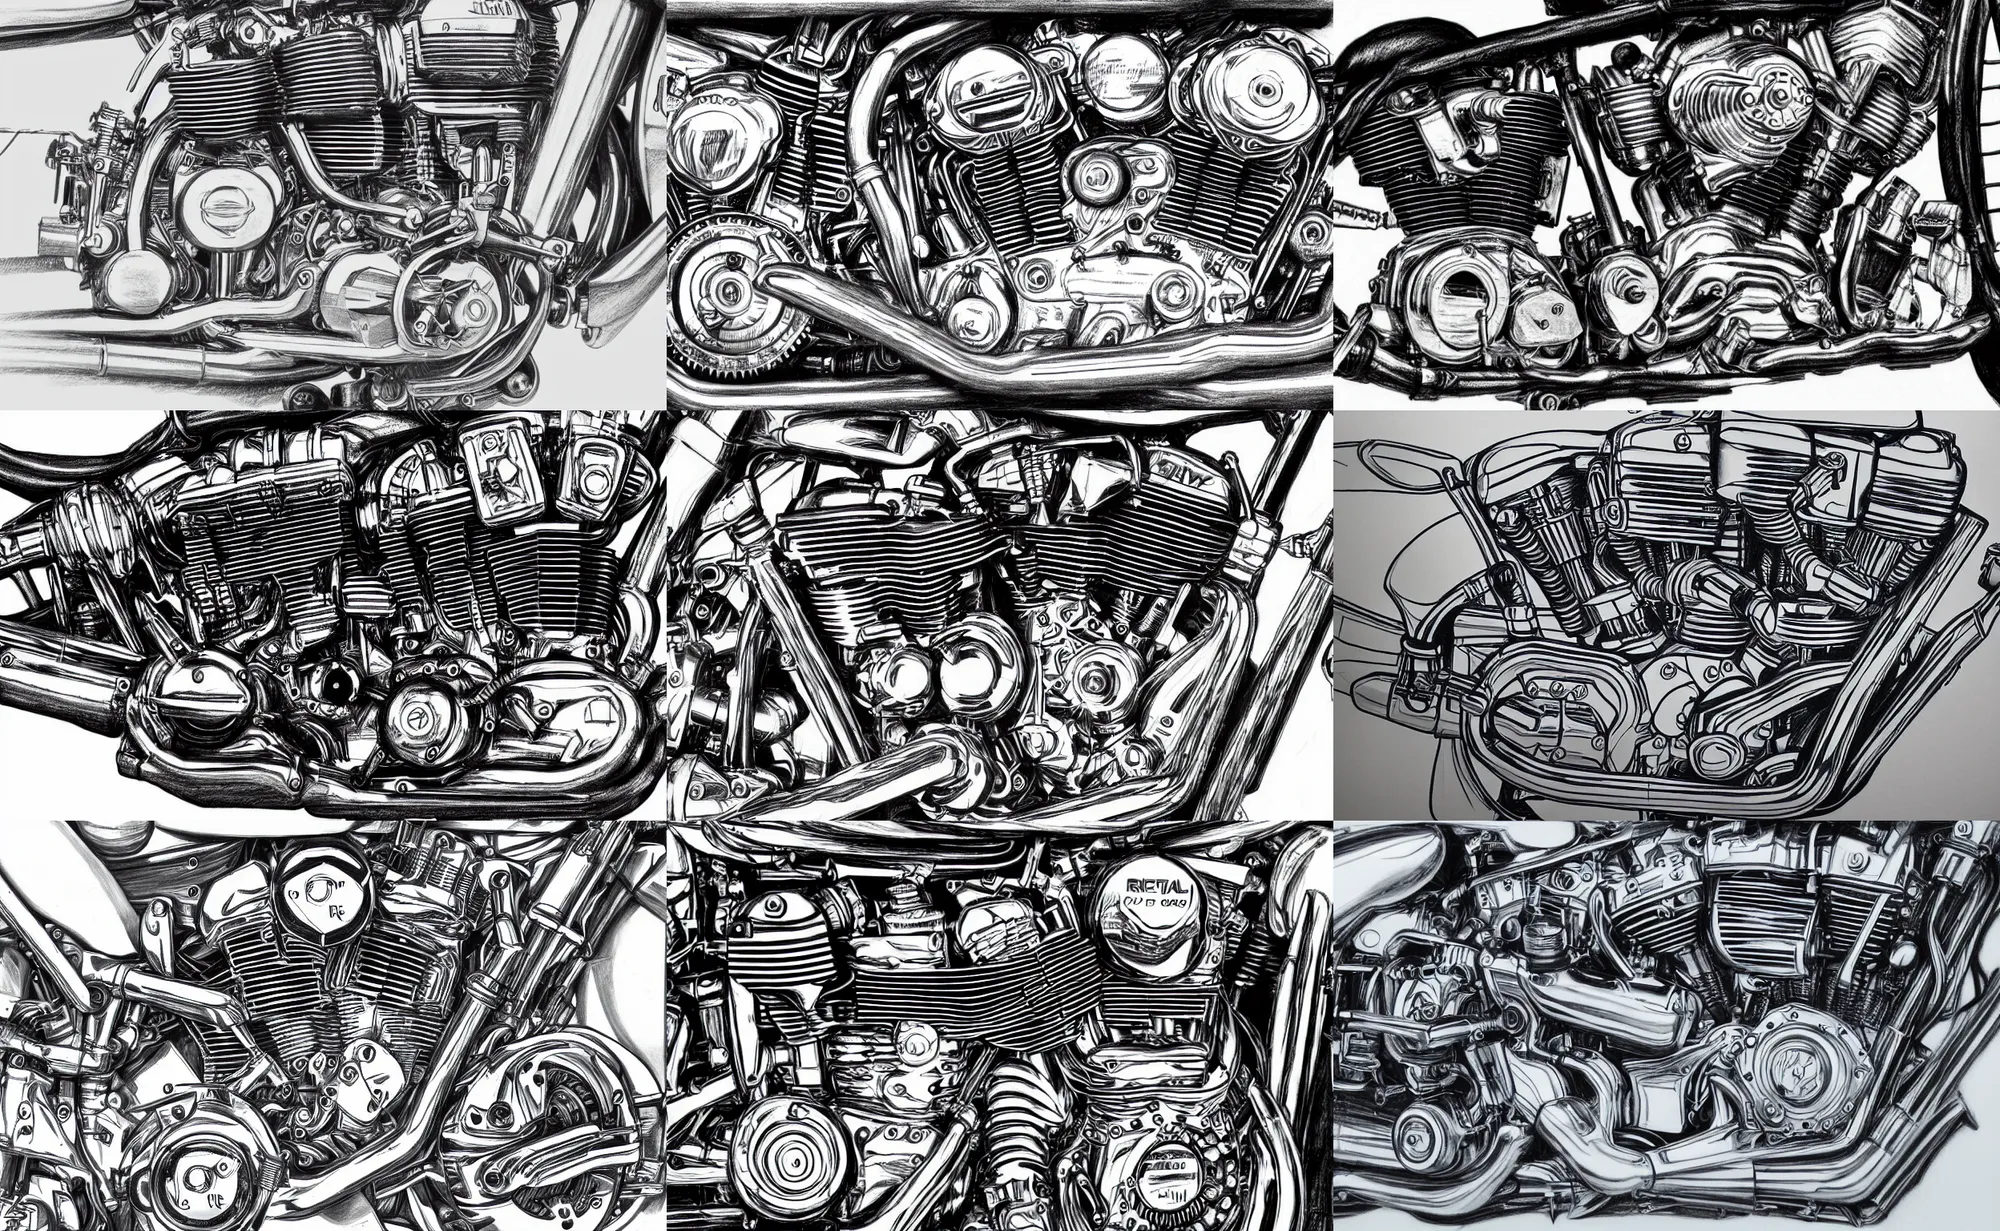 Prompt: Well-detailed rotary motorcycle engine, skillful pencil rendering magnus opus